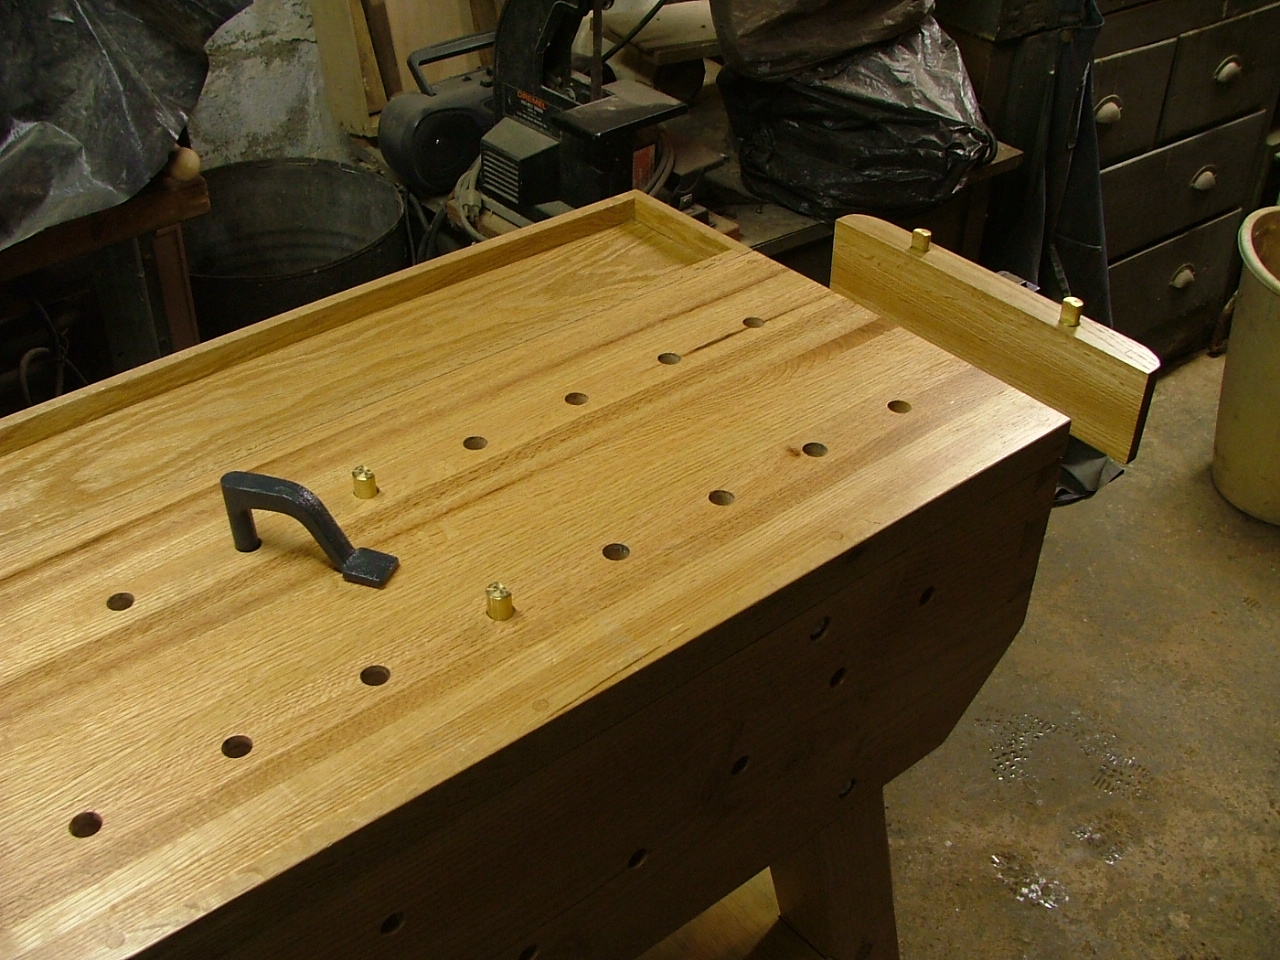 Woodworking table holes